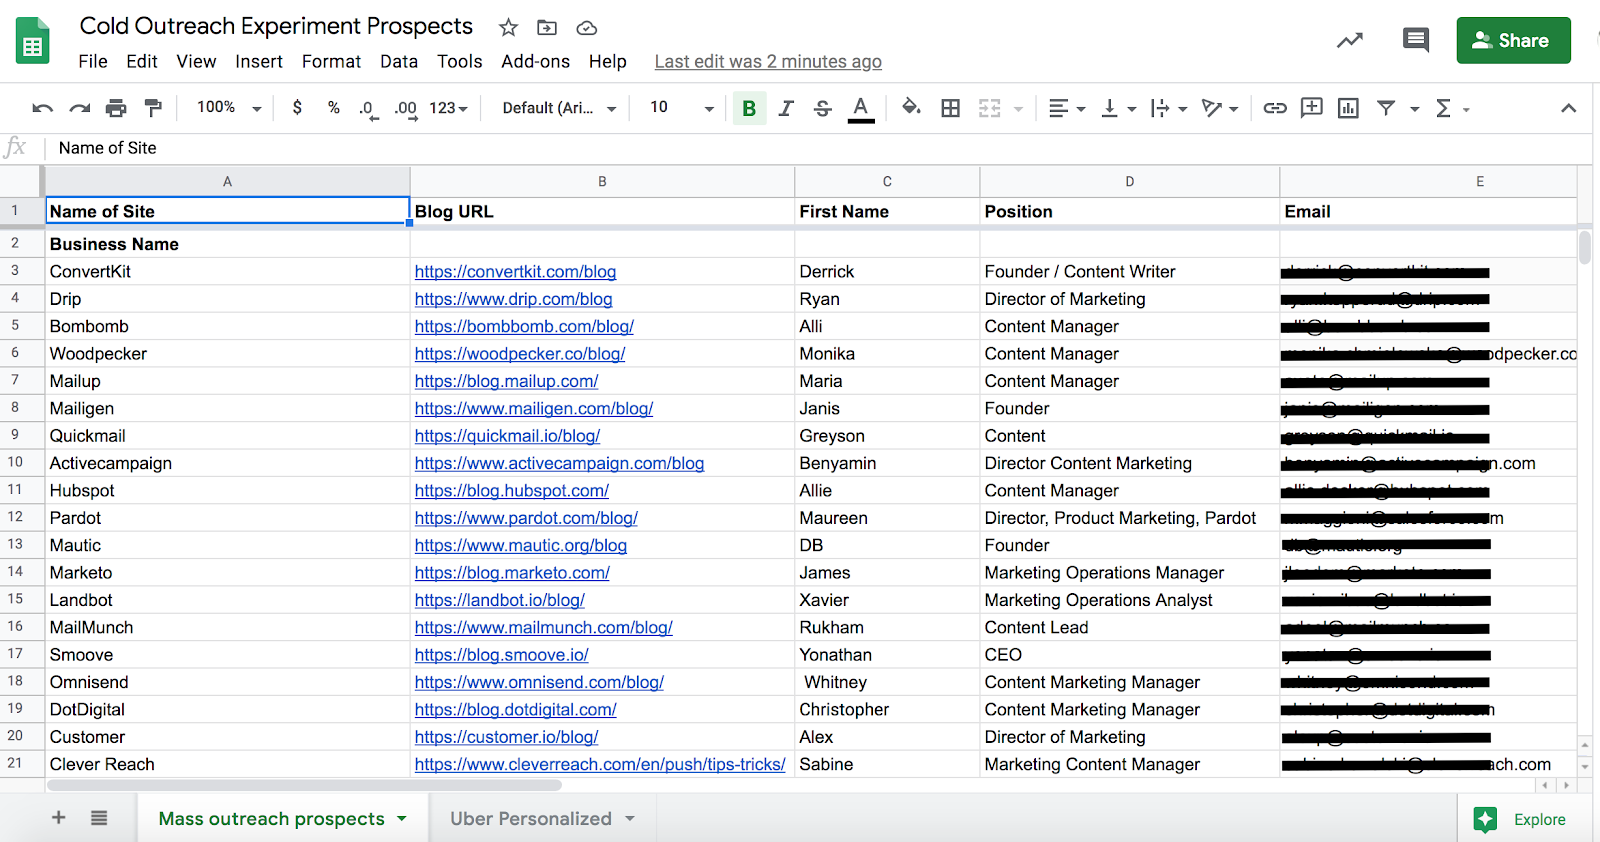 Manual campaign - Cold outreach experiment 100 list of prospects